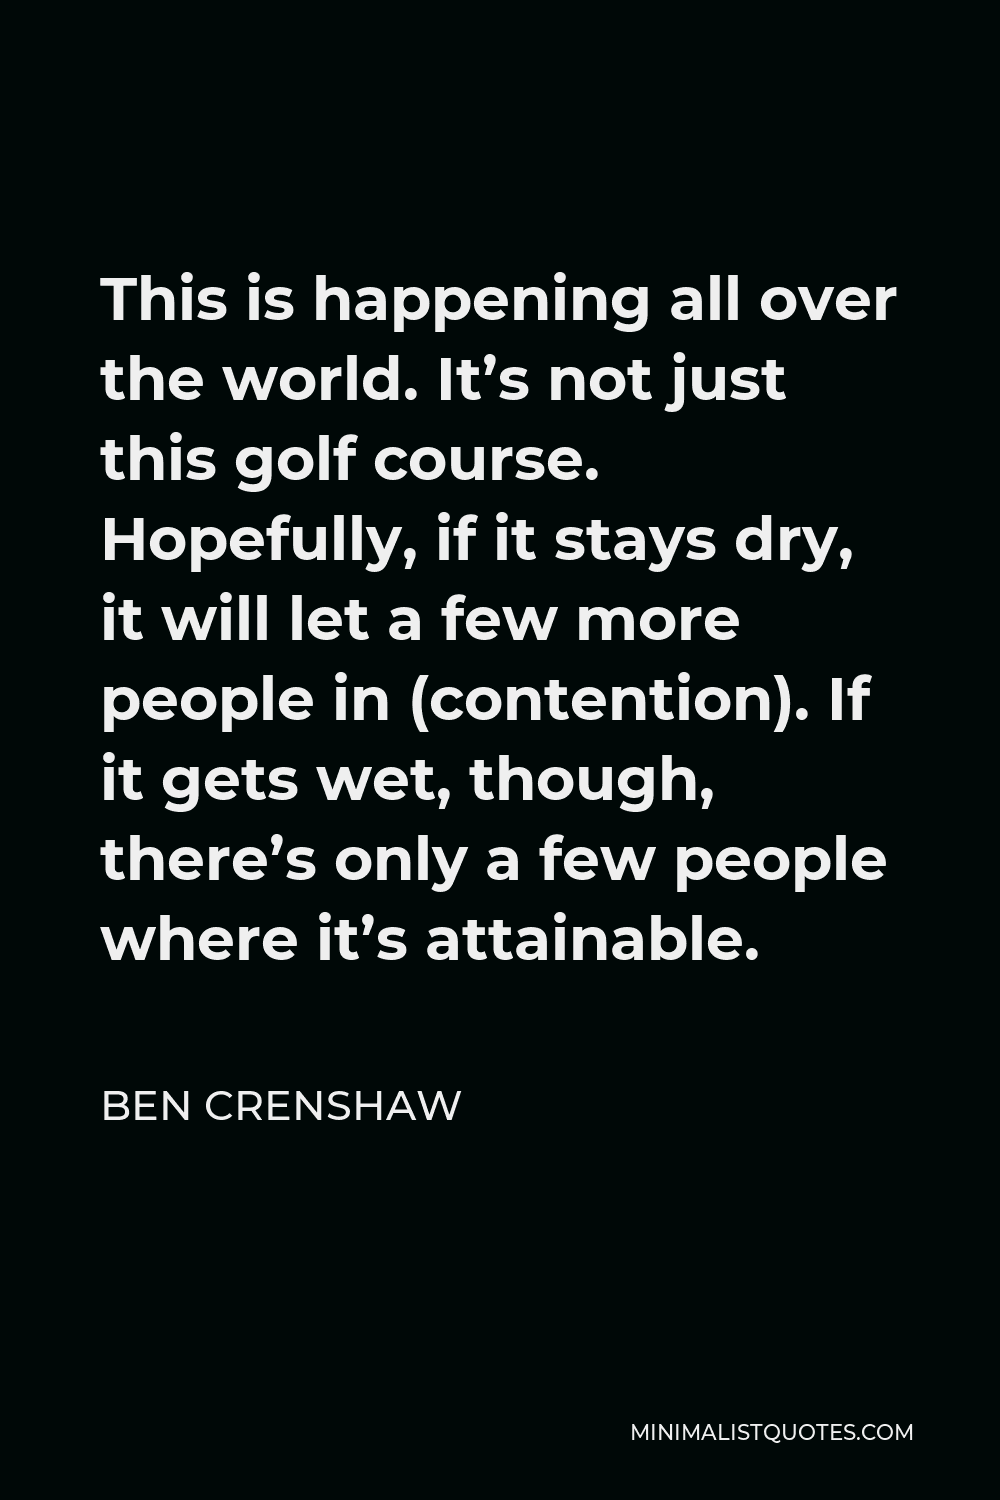 Ben Crenshaw Quote - This is happening all over the world. It’s not just this golf course. Hopefully, if it stays dry, it will let a few more people in (contention). If it gets wet, though, there’s only a few people where it’s attainable.